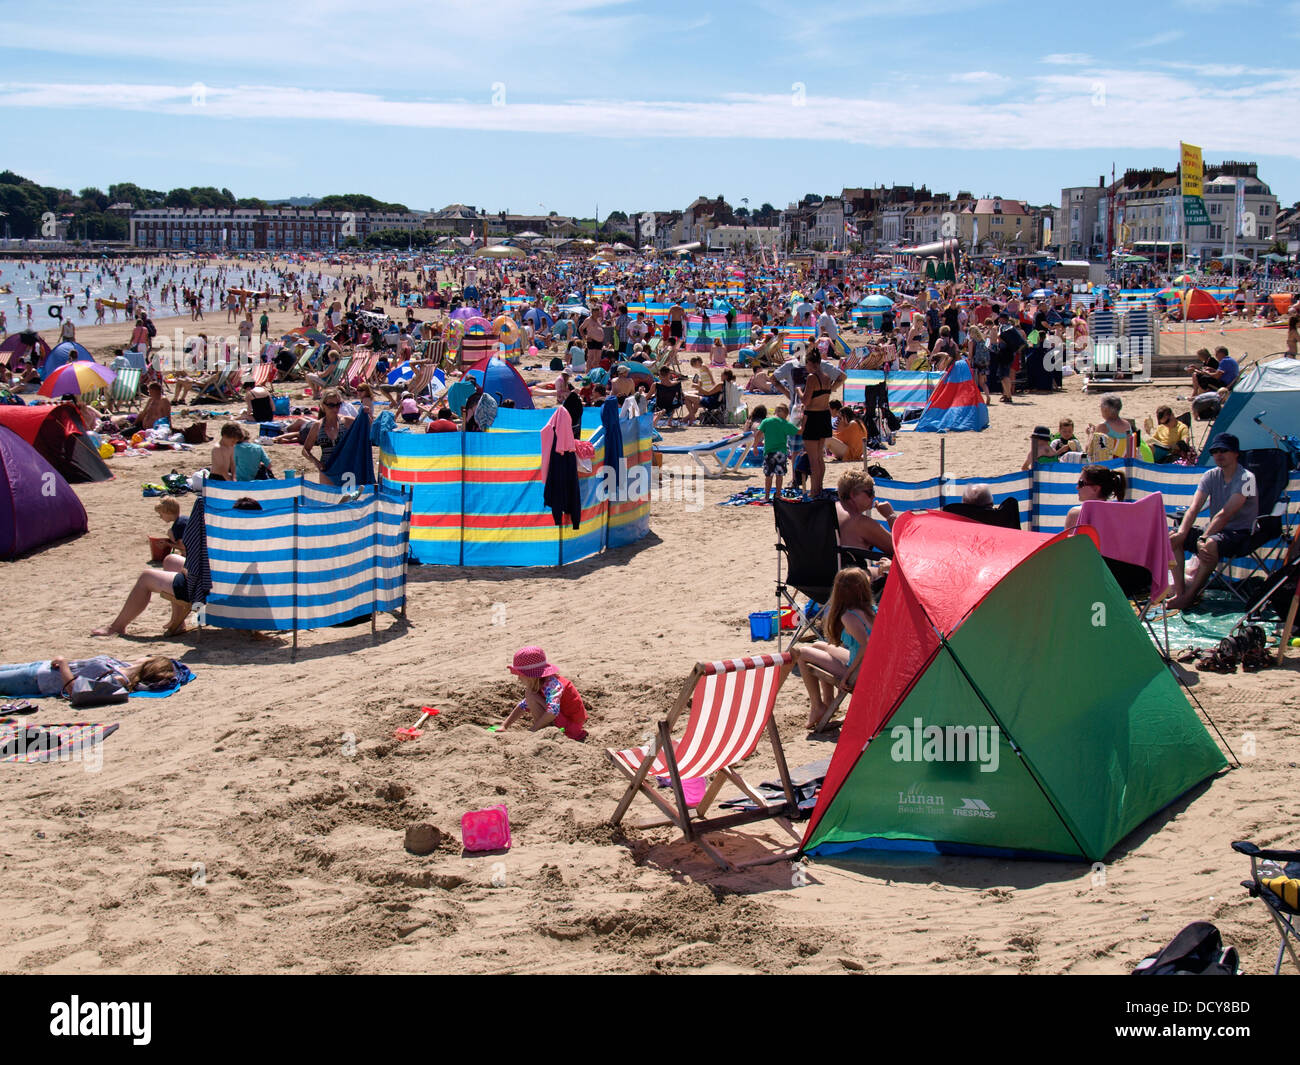 Overcrowded Beach High Resolution Stock Photography and Images - Alamy